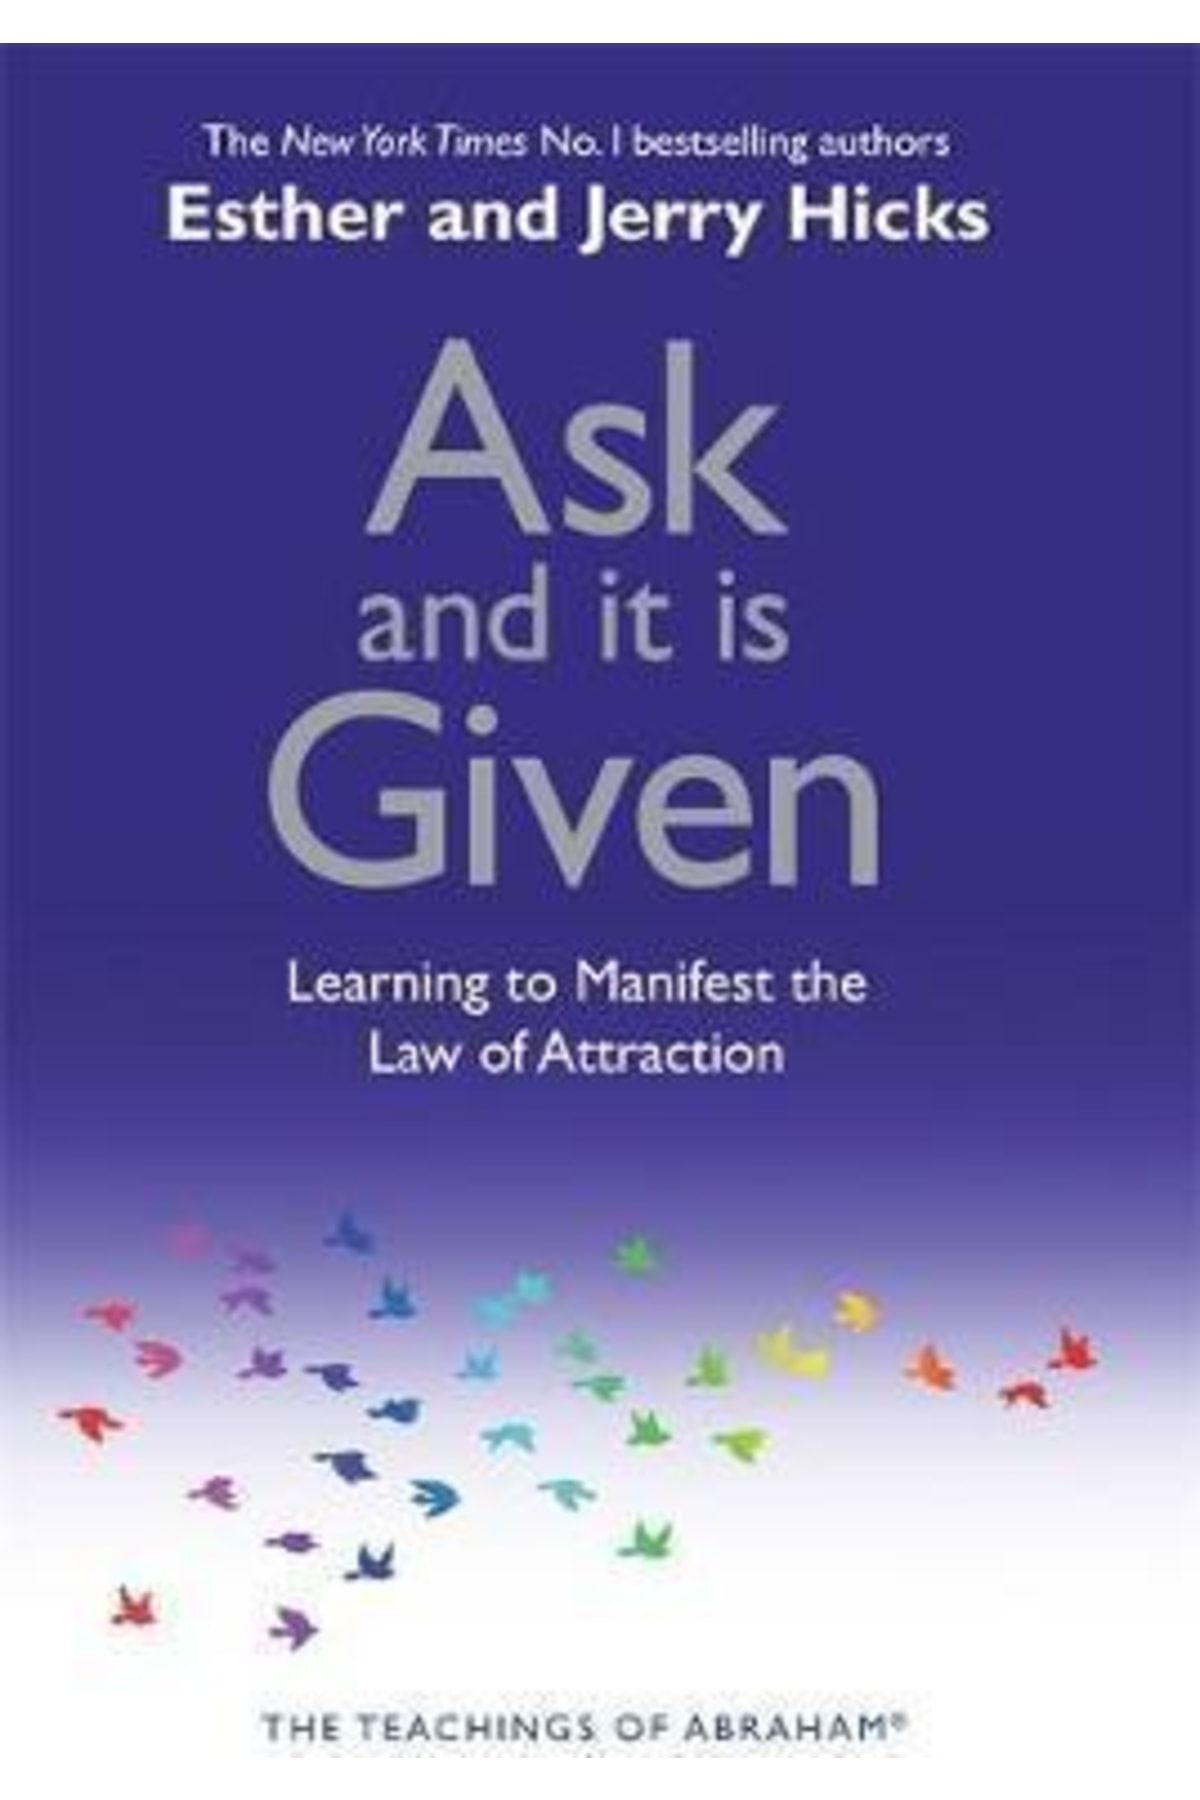 Ask uk. Ask and it is given. Jerry & Esther Hicks. Esther (given name). Law of attraction book.